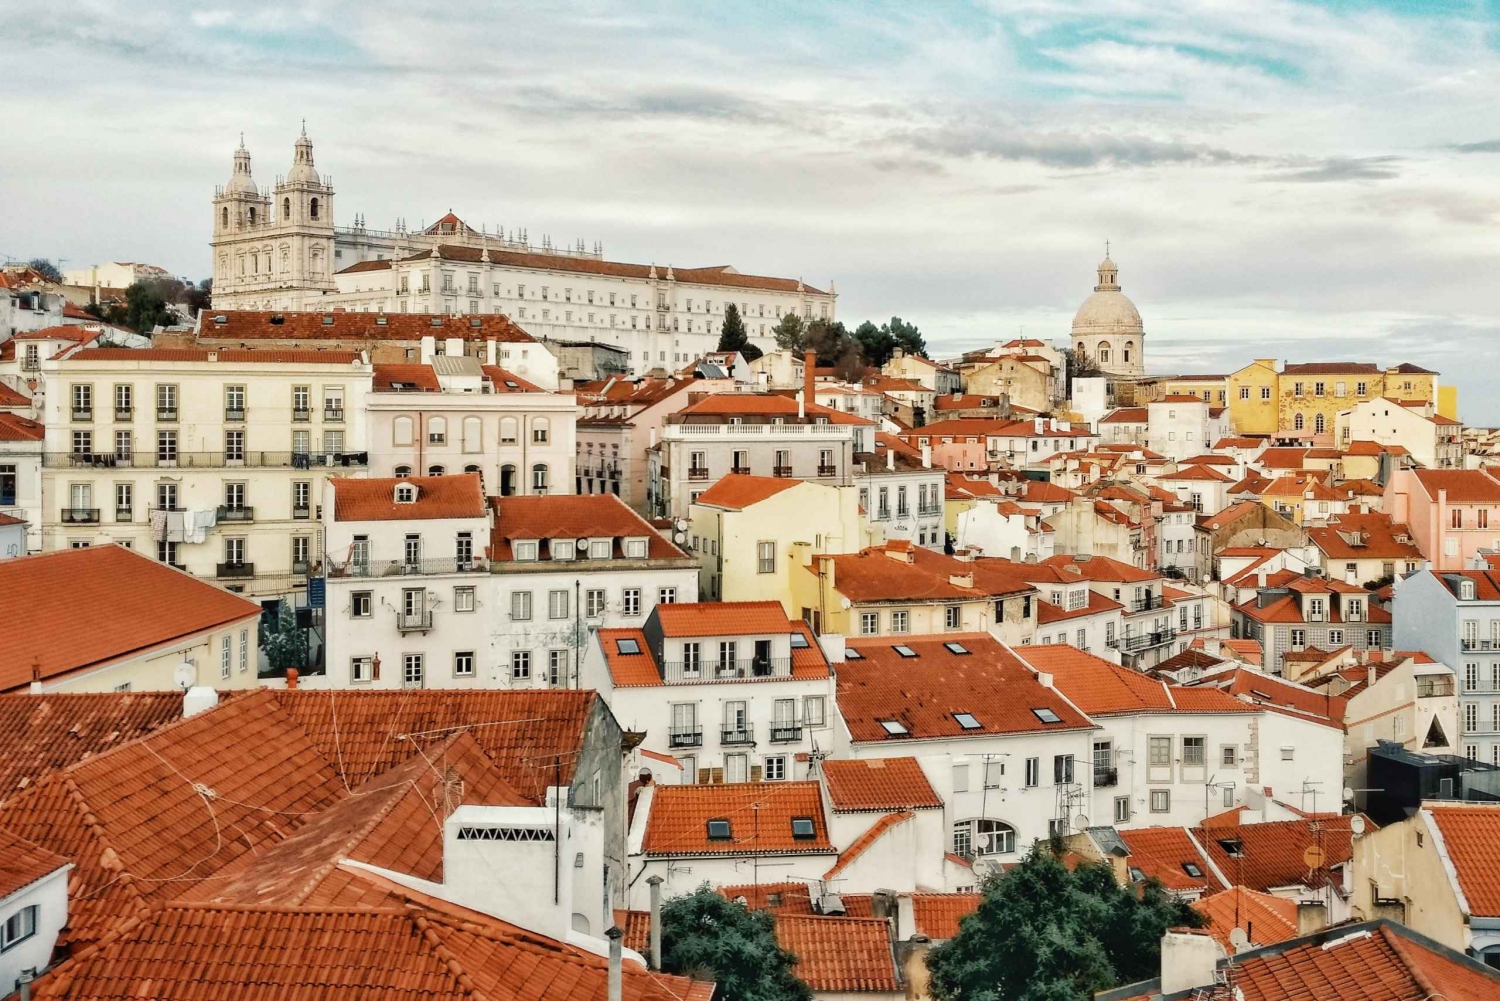 Lisbon: The city where it all started